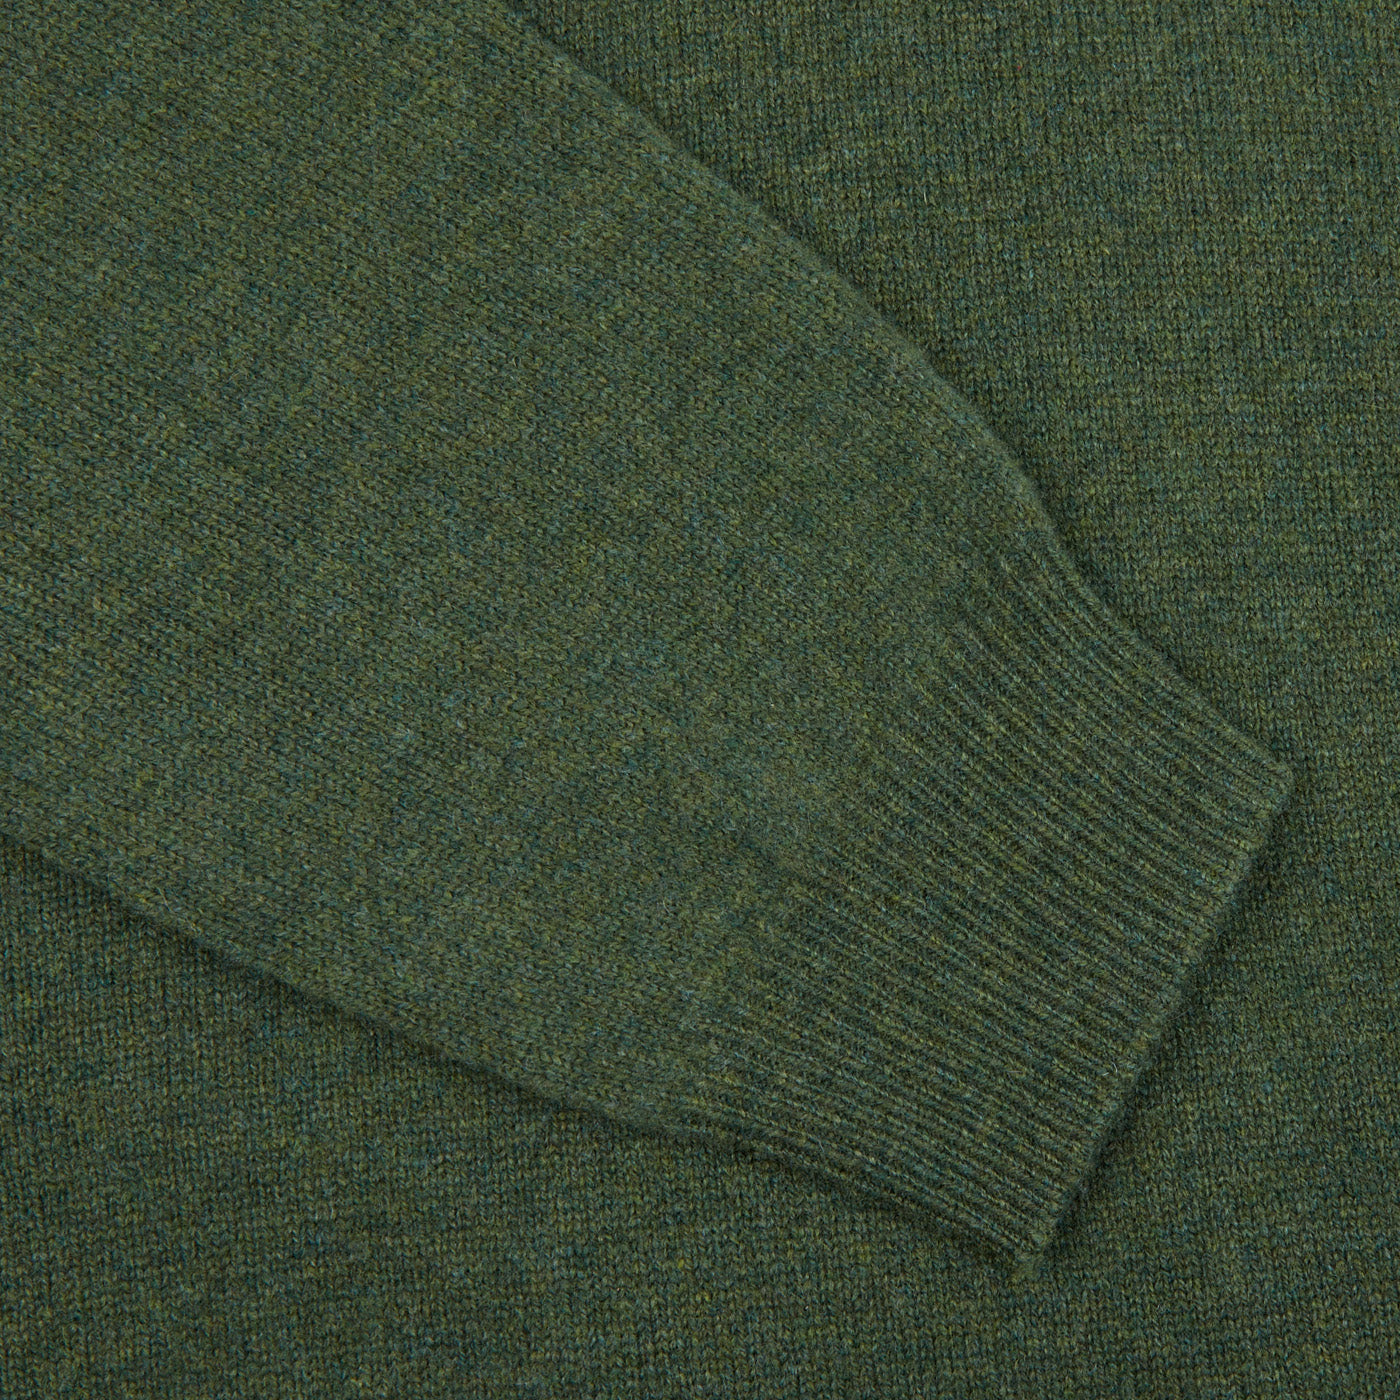 A contemporary version of an Alan Paine Rosemary Green Lambswool Crew Neck sweater, shown in a close-up shot.